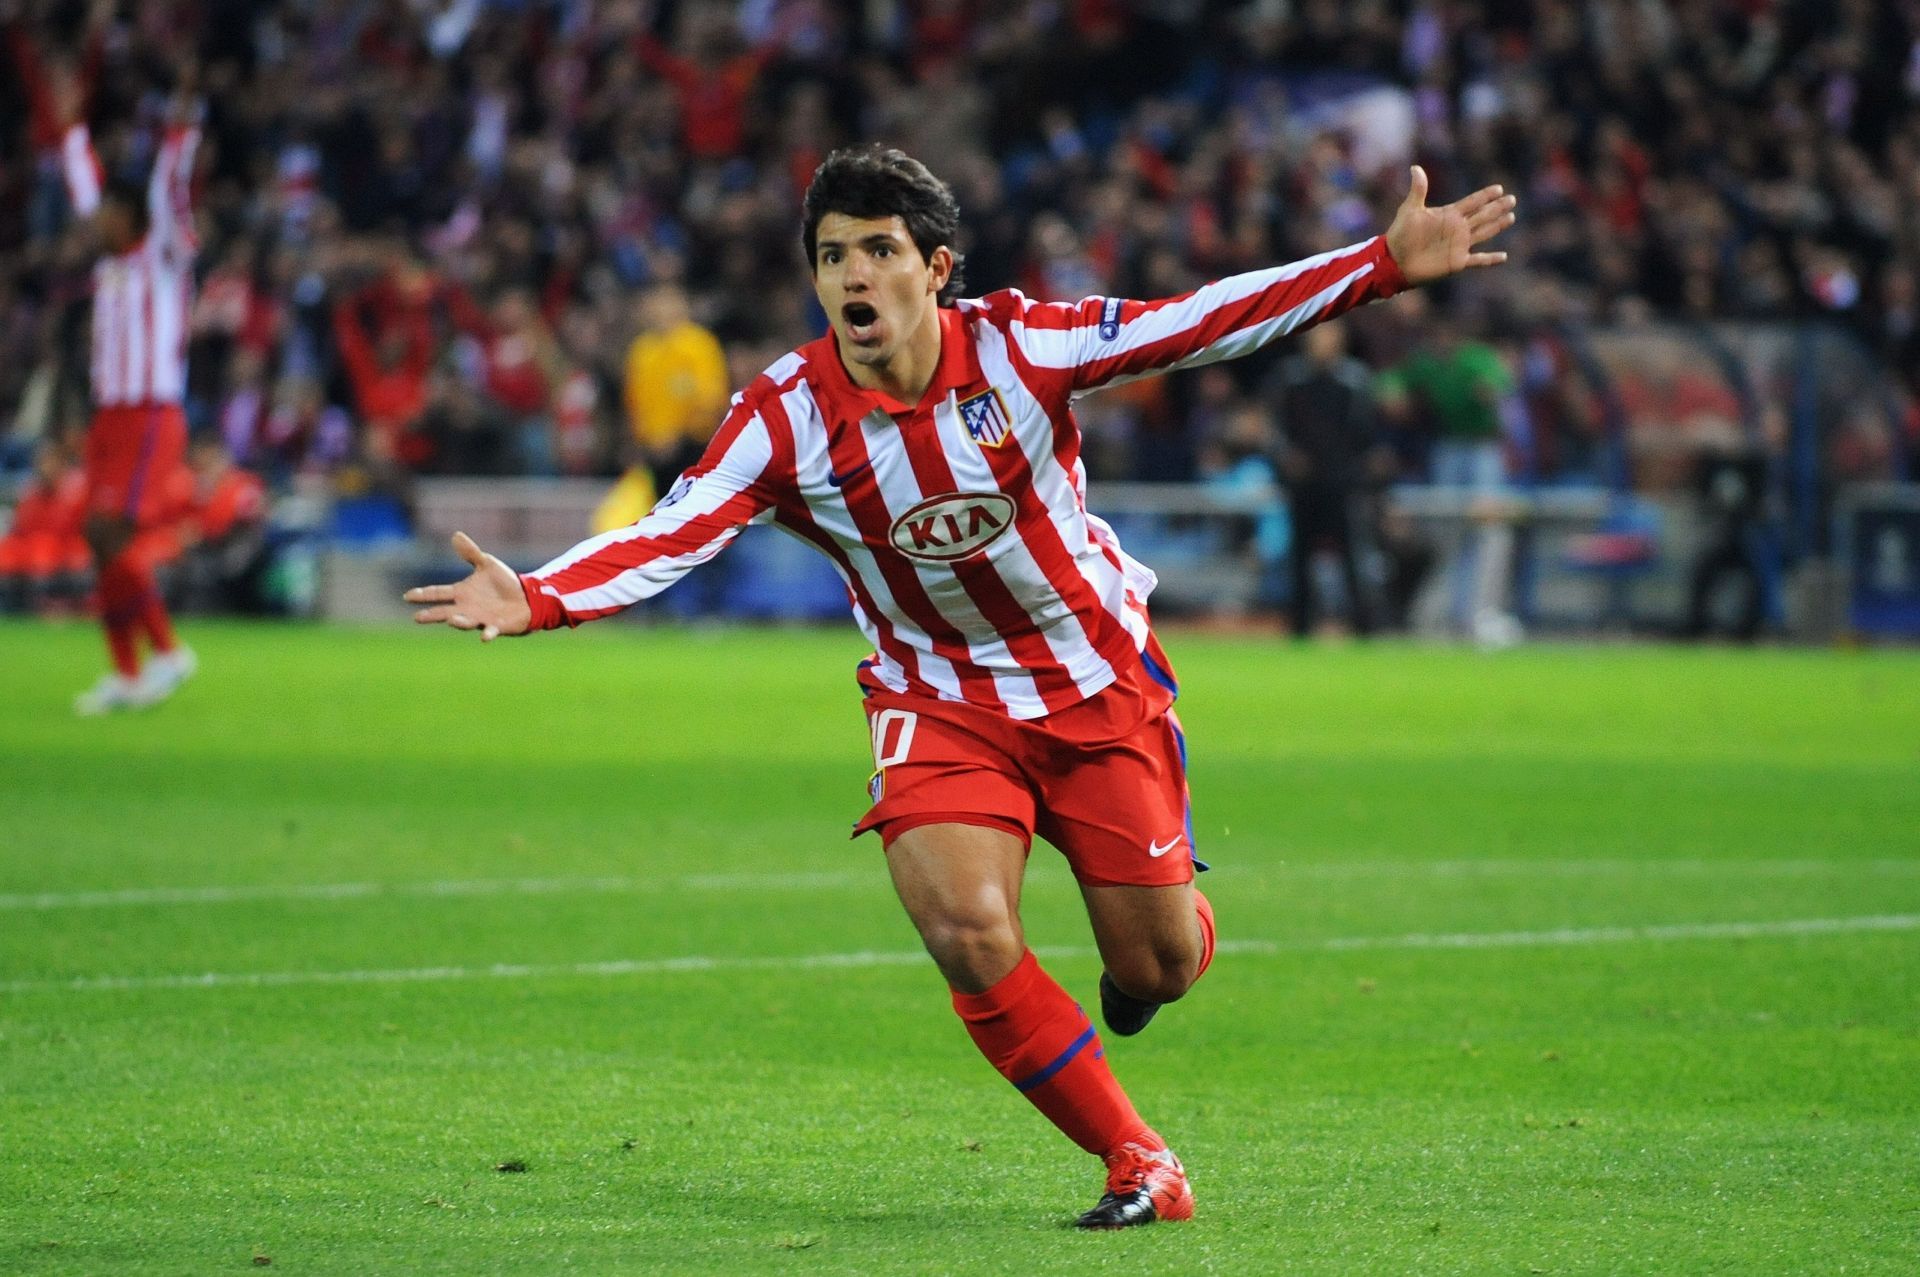 Sergio Aguero was the Golden Boy winner in his first season with Atletico Madrid.